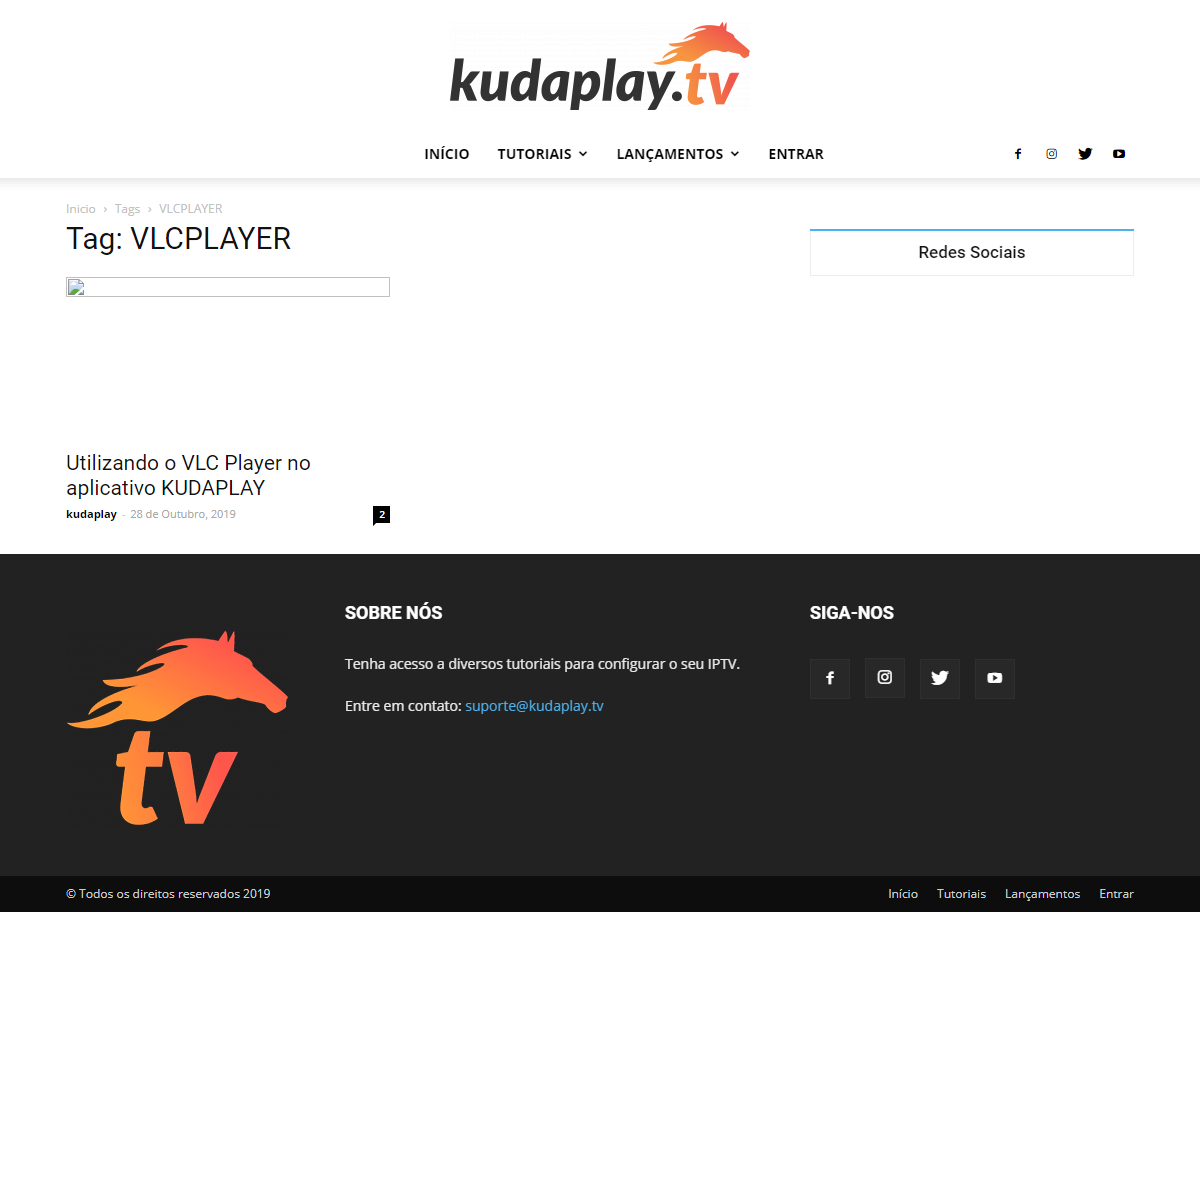 A complete backup of https://kudaplay.tv/blog/tag/vlcplayer/